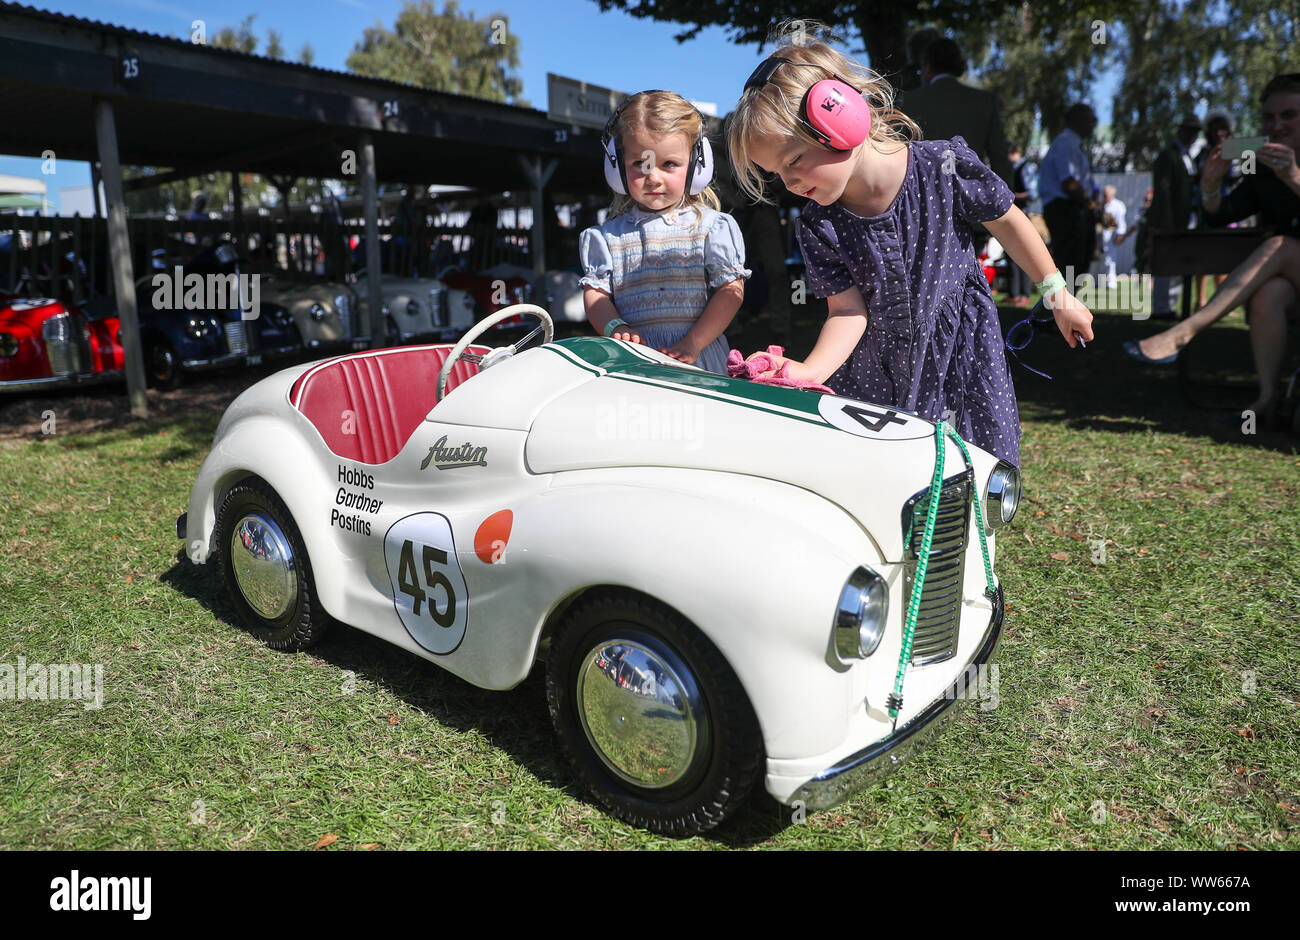 Poppy, six (right), and her sister Milly, three, from Gloucestershire, polish their Austin J40 pedal car ahead of Saturday's Settrington Cup, during day one of the Goodwood Revival at the Goodwood Motor Circuit, in Chichester. Stock Photo